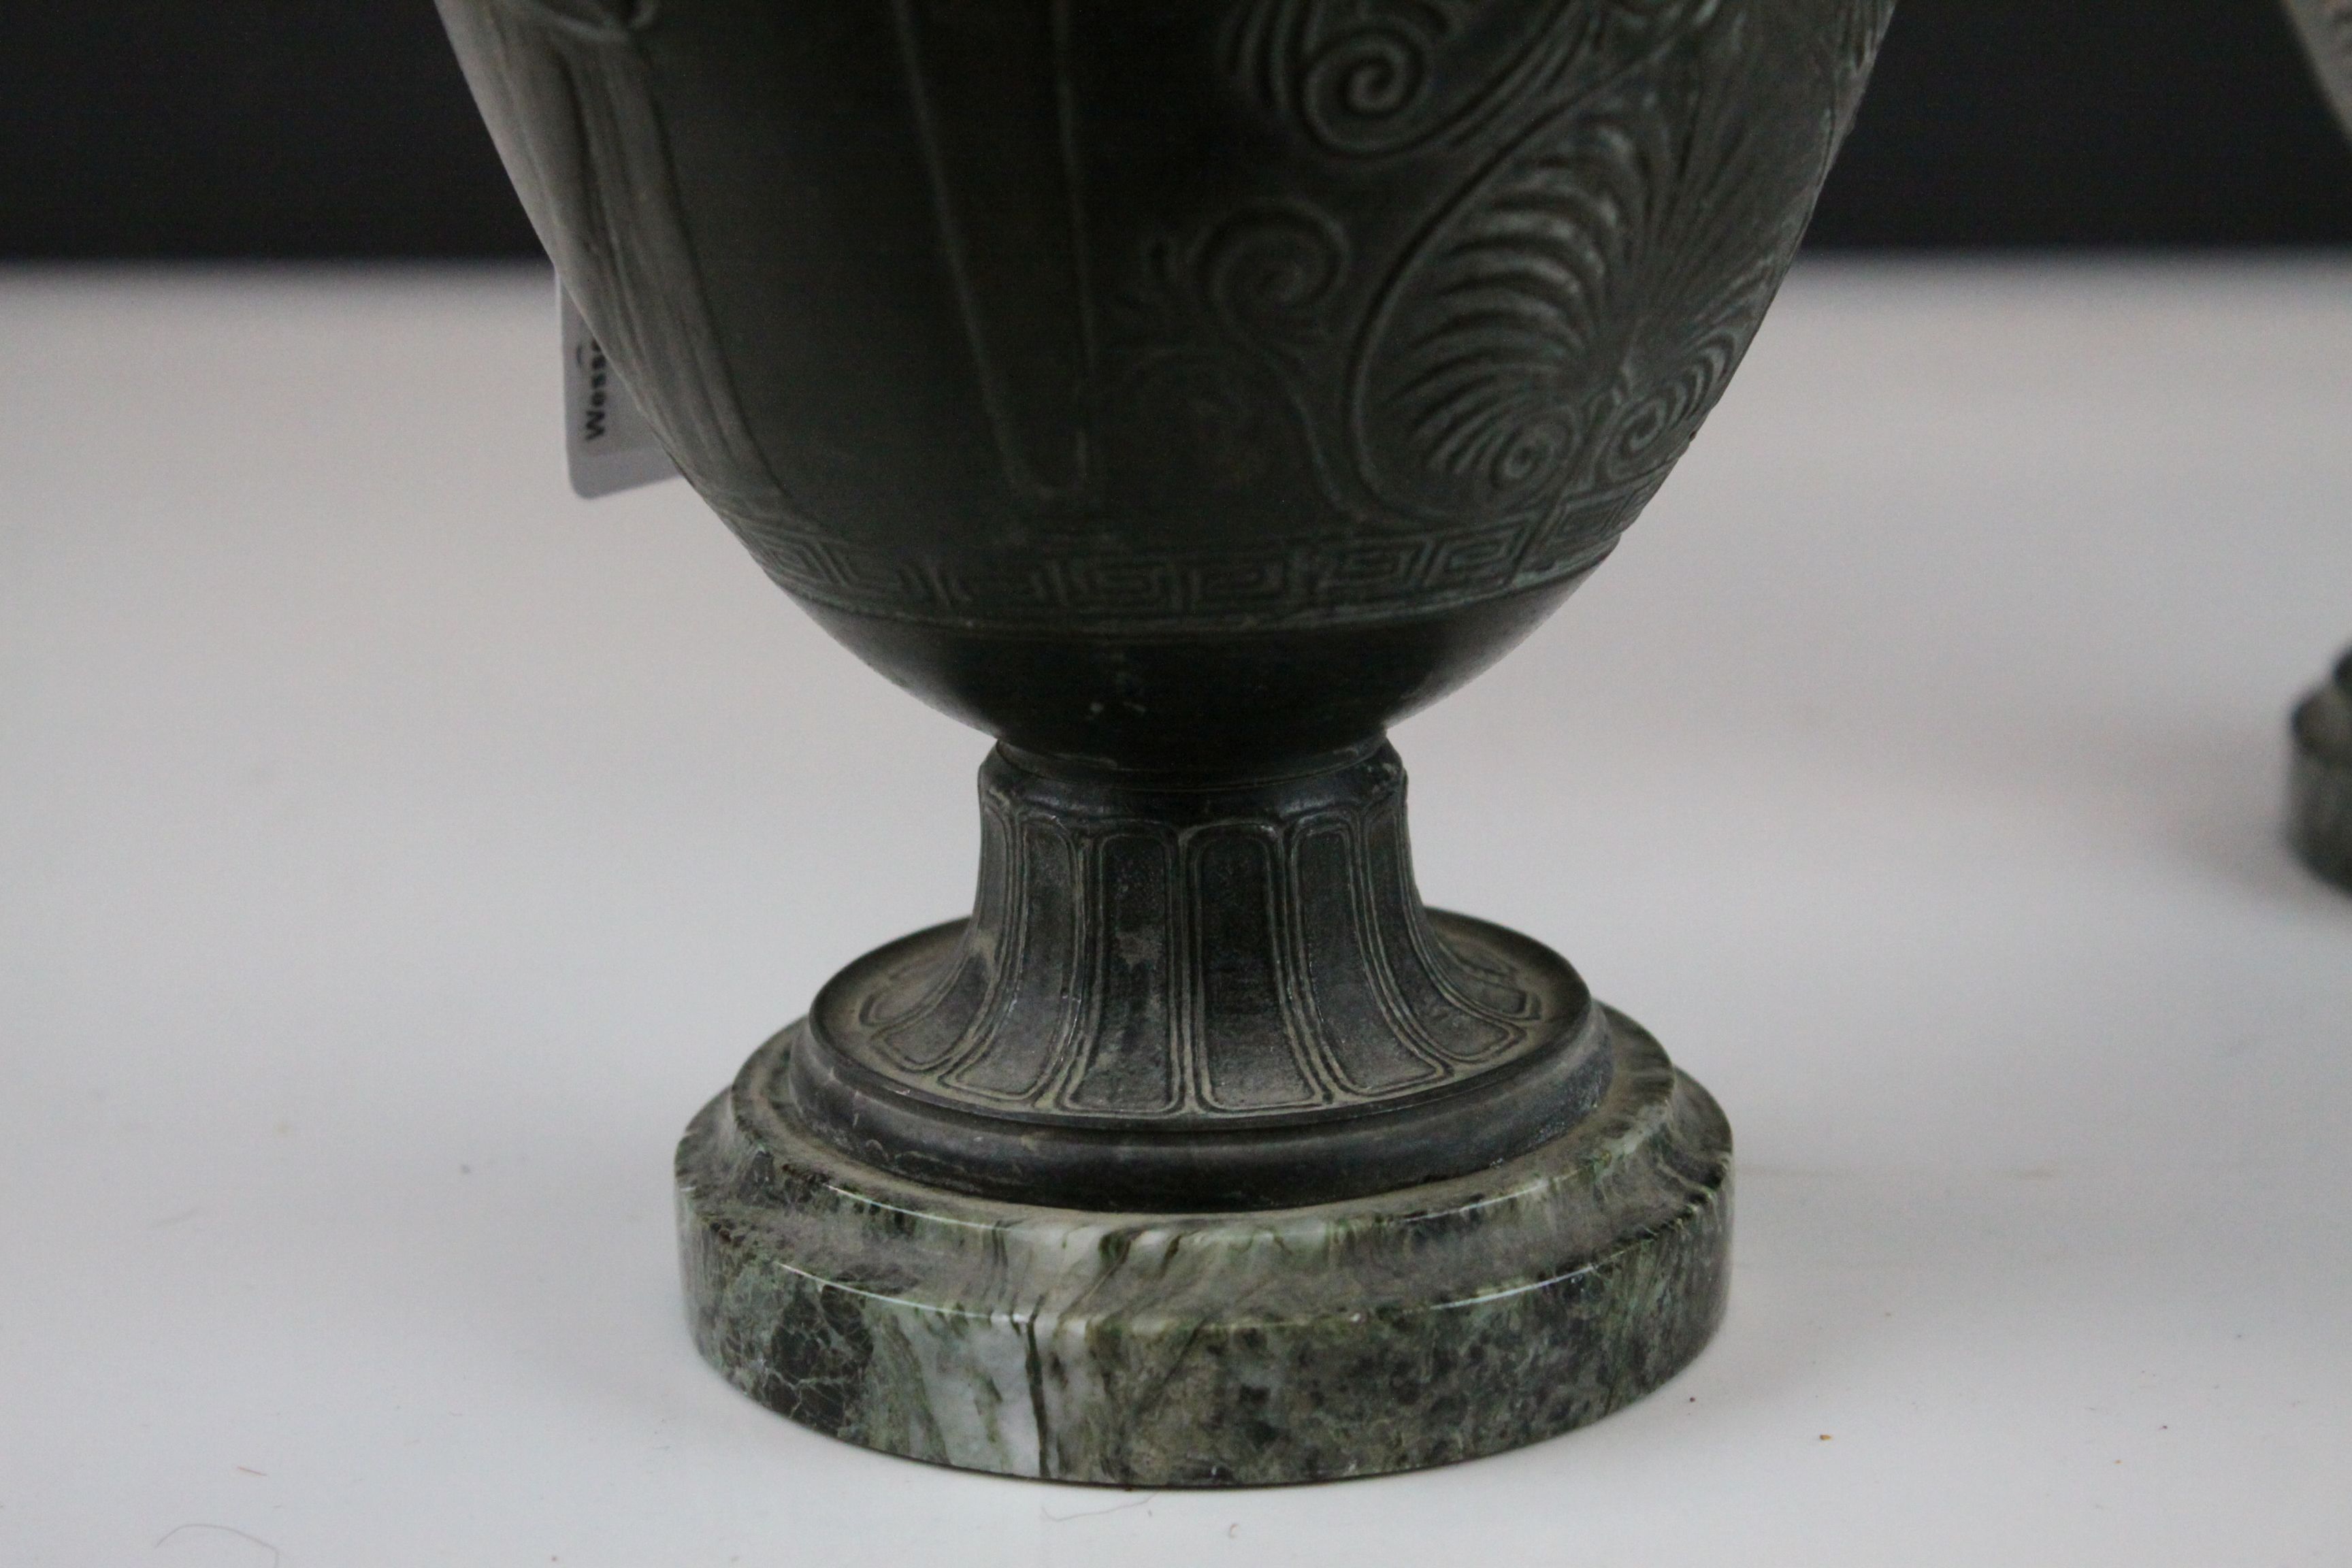 Pair of 19th century Cast Classical Twin Handled Urns on Green Marble Bases, 28.5cms high - Image 4 of 7